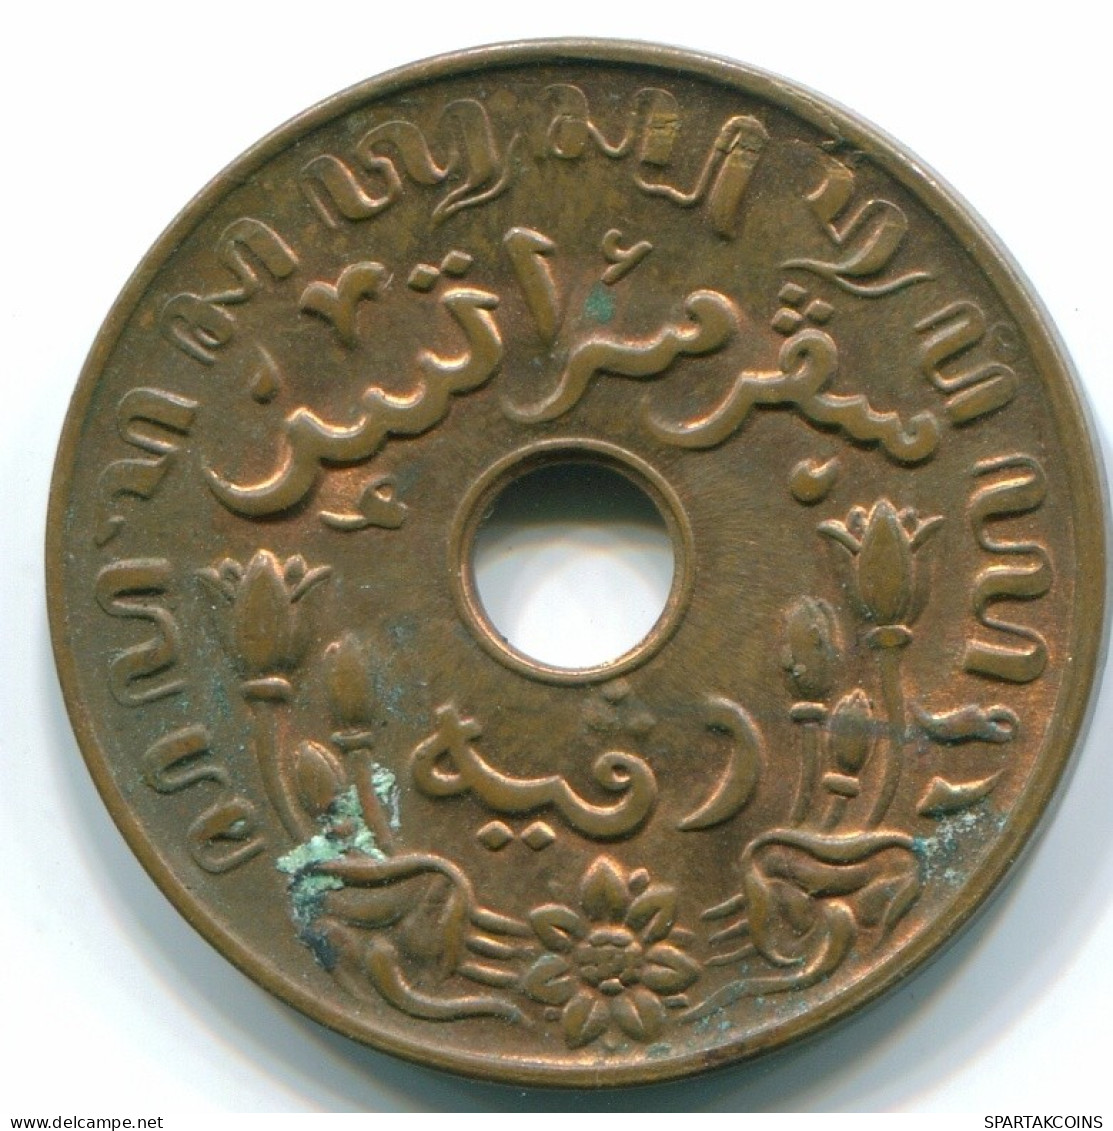 1 CENT 1945 S NETHERLANDS EAST INDIES INDONESIA Bronze Colonial Coin #S10371.U.A - Indes Néerlandaises